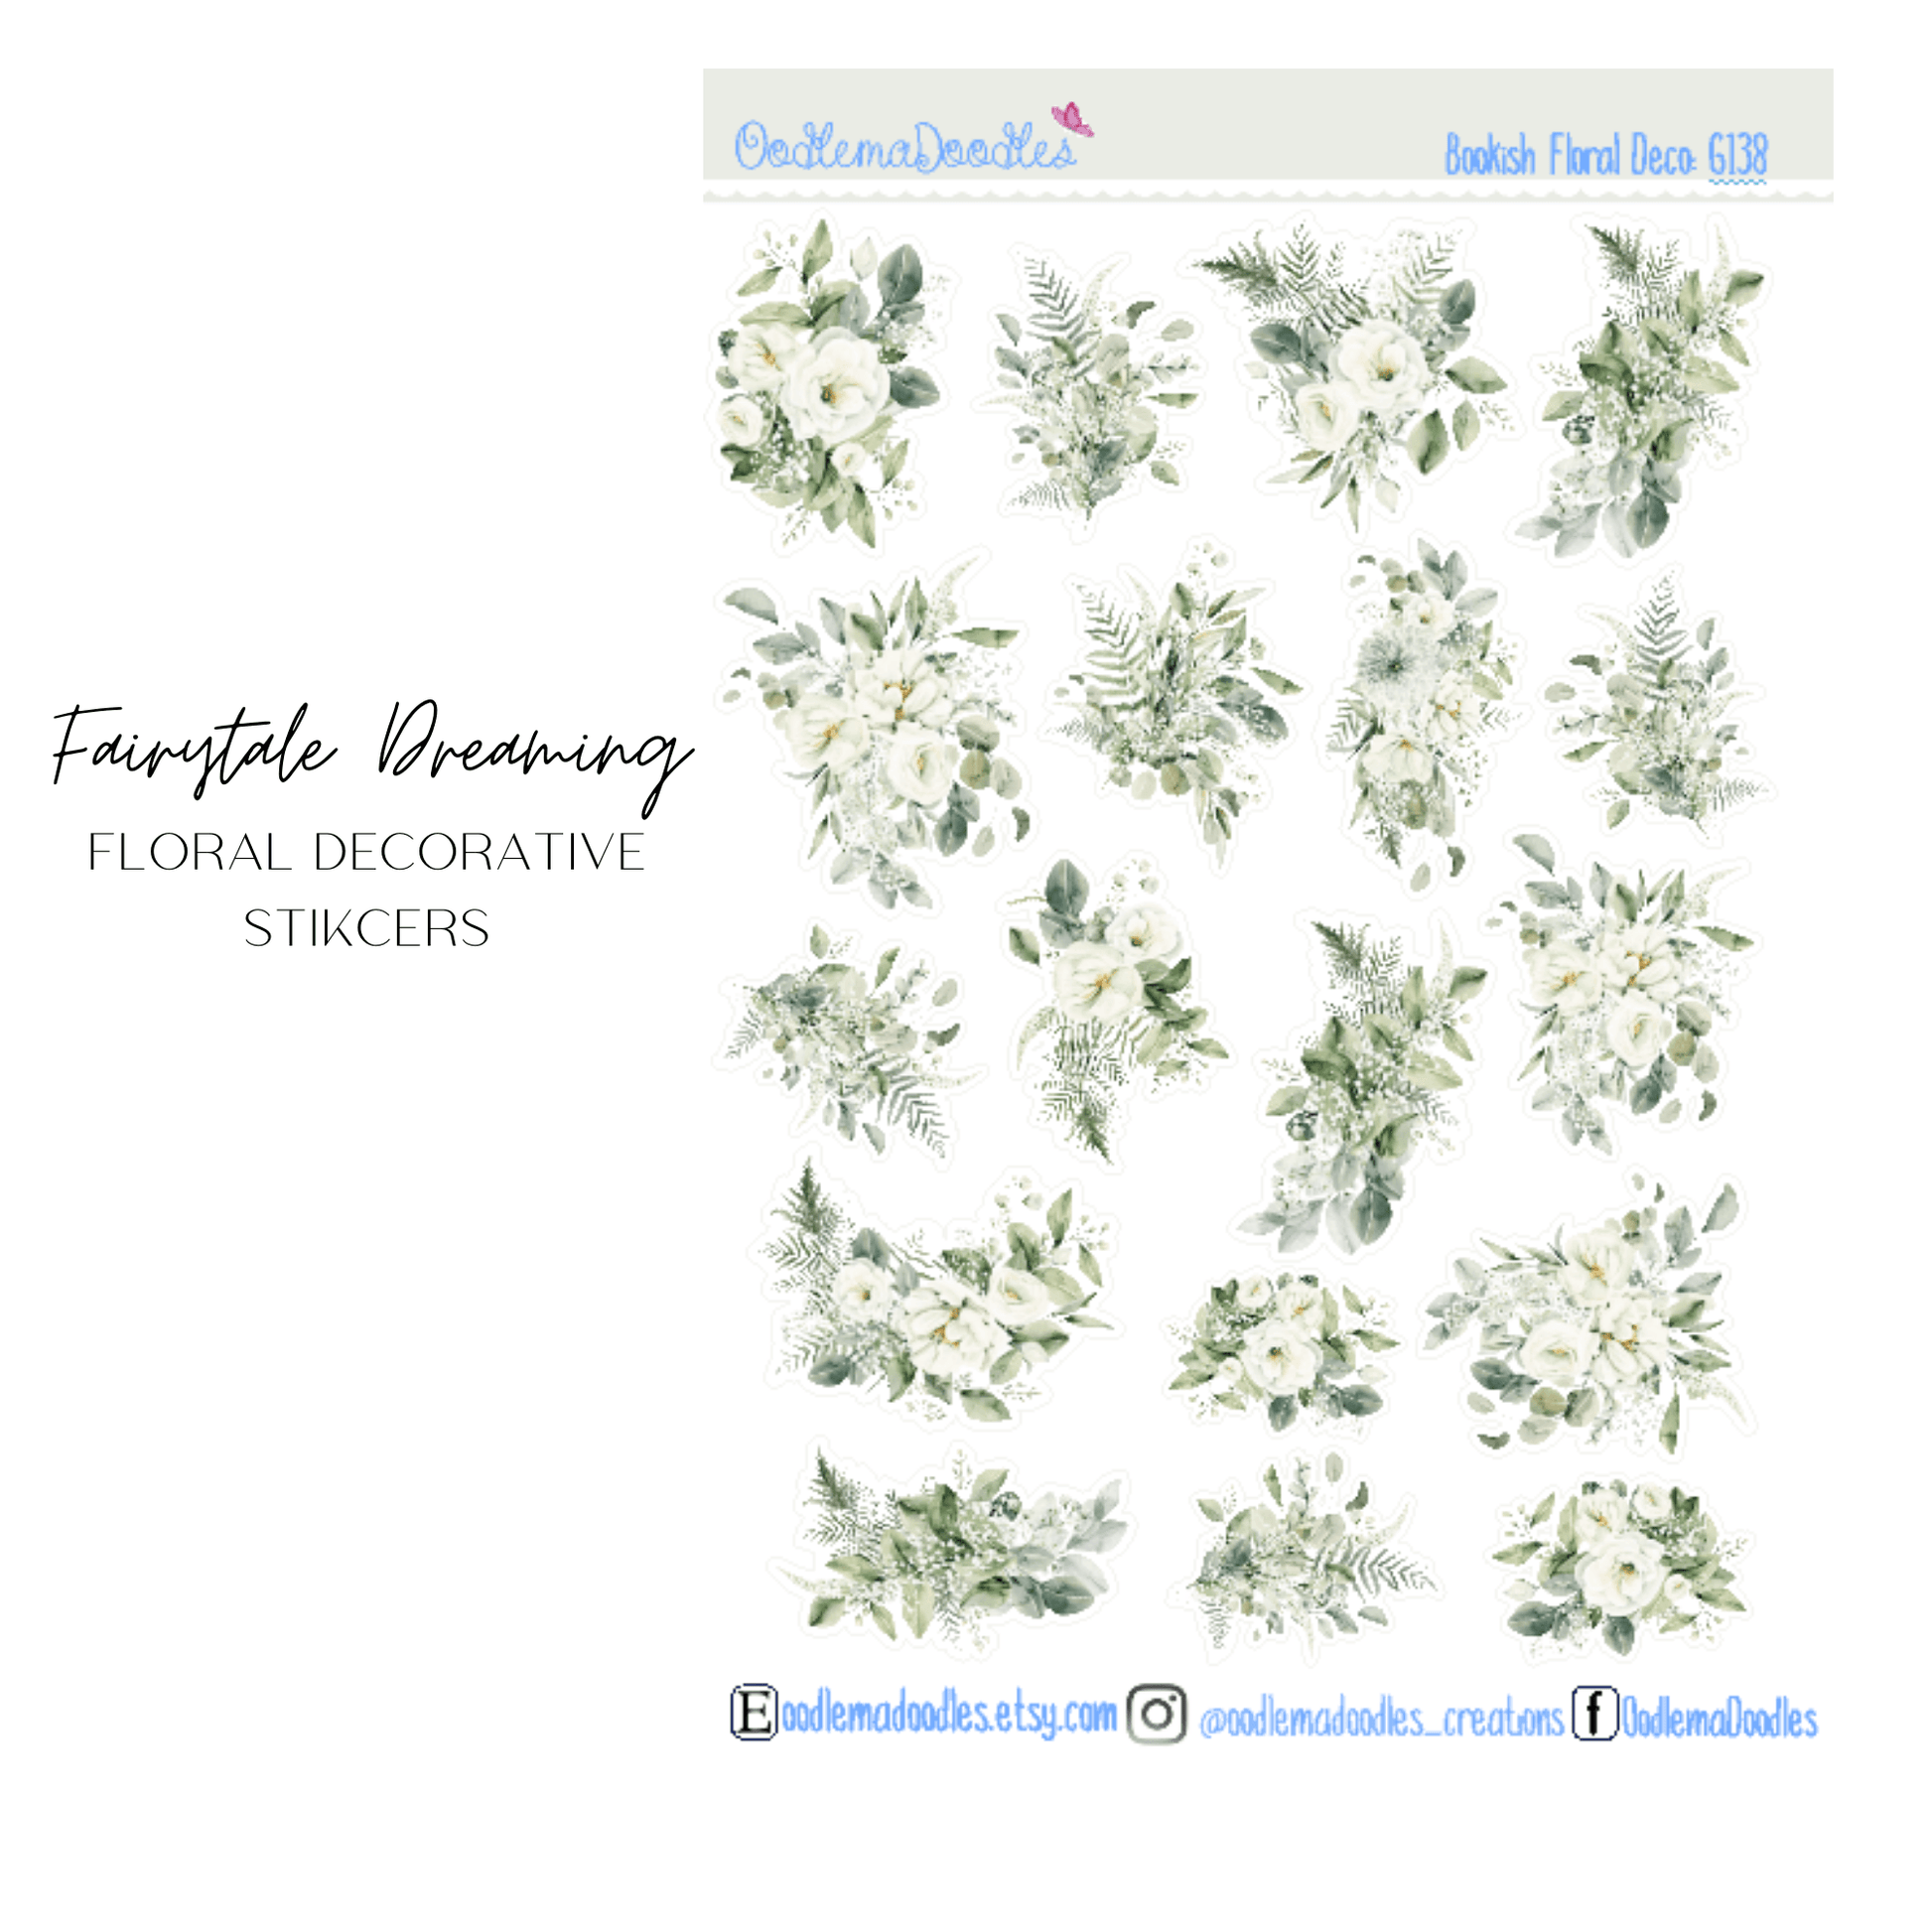 Bookish Floral Decorative Stickers - oodlemadoodles